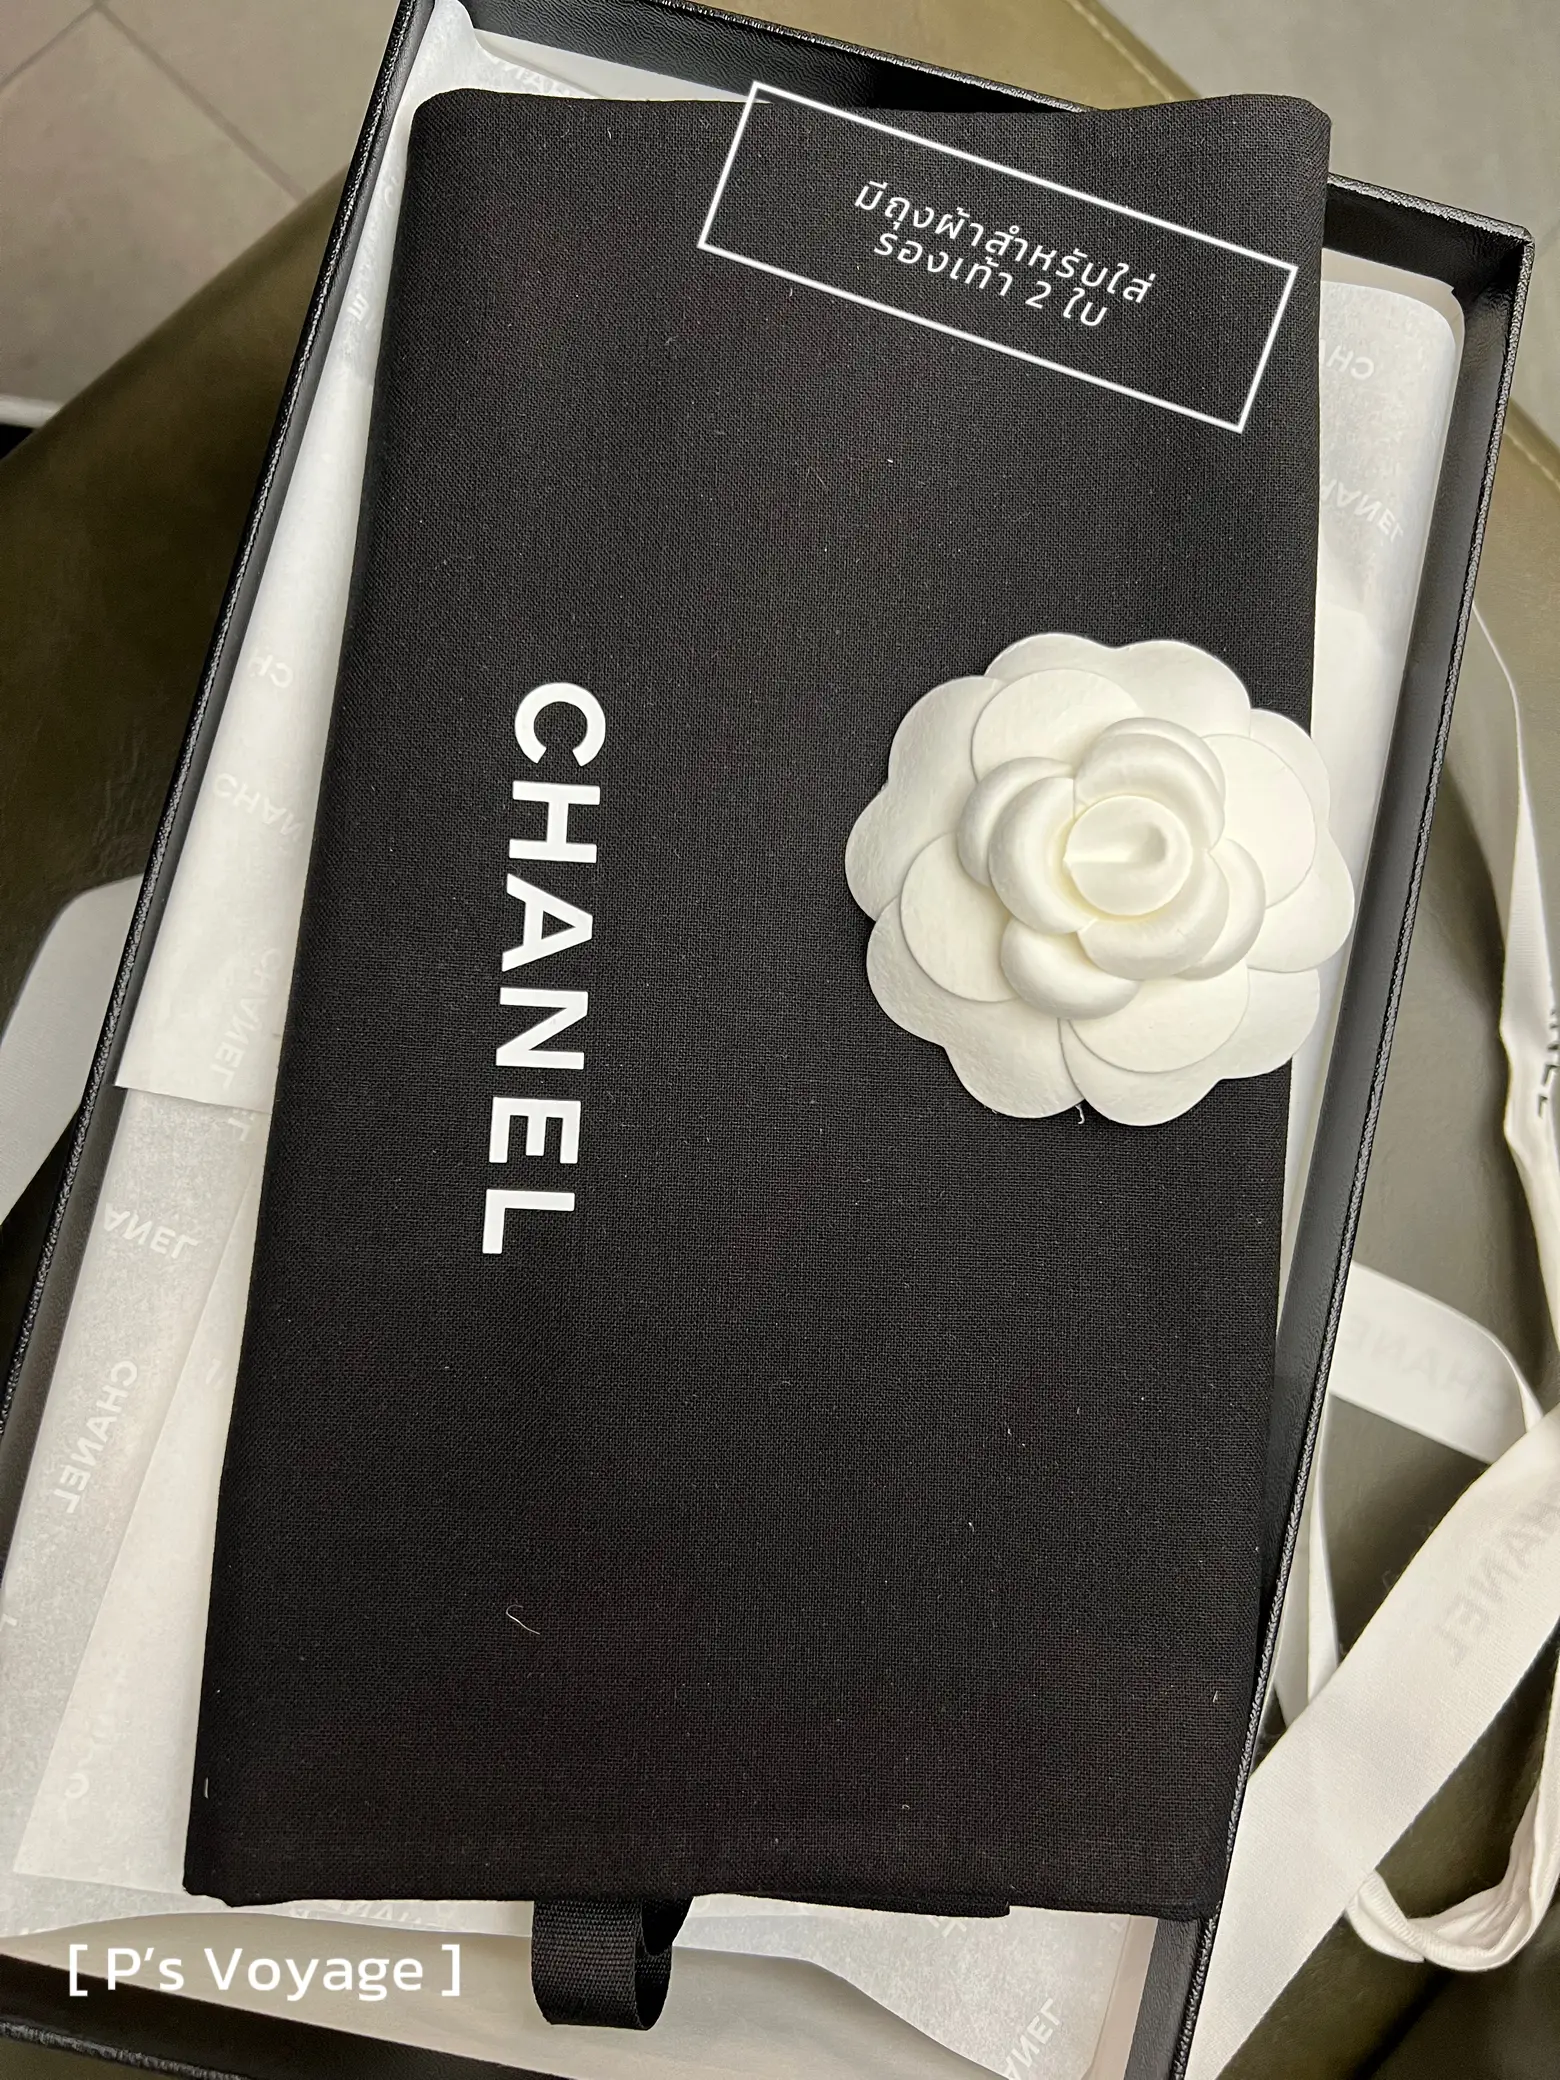 Unboxing Chanel Espadrilles 🤍 [ P's Voyage ], Gallery posted by P's  Voyage